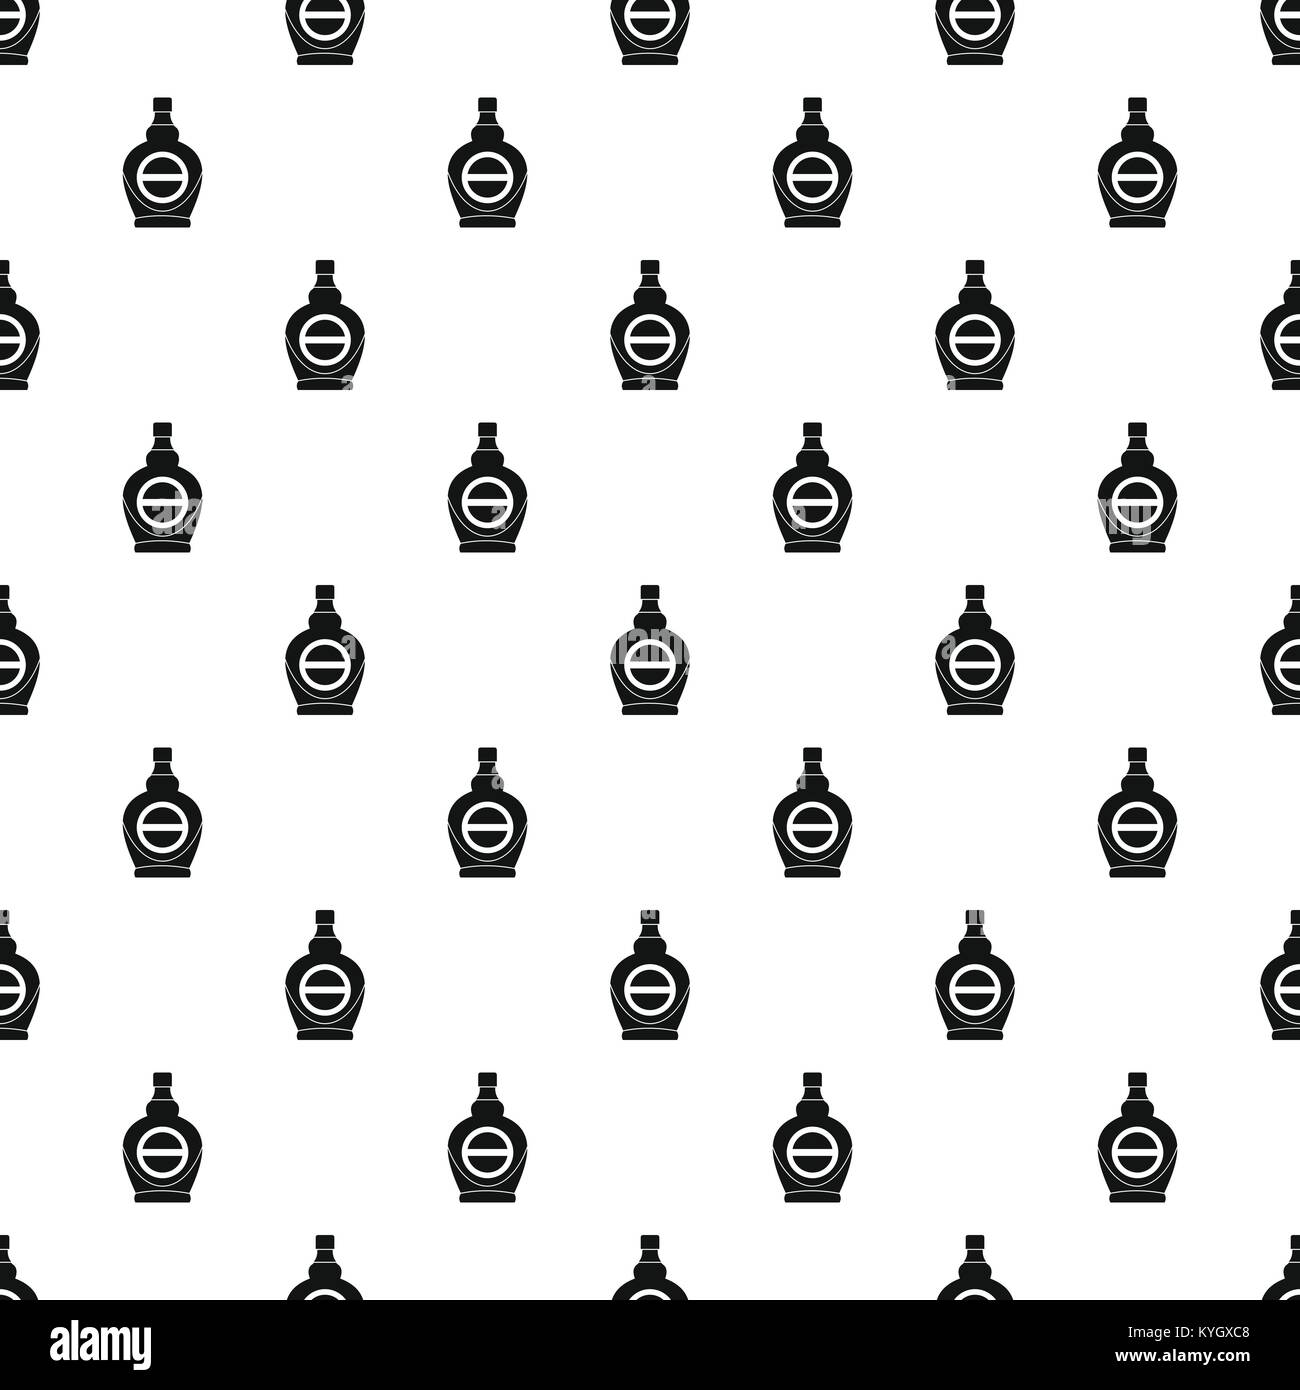 Maple syrup in glass bottle pattern vector Stock Vector